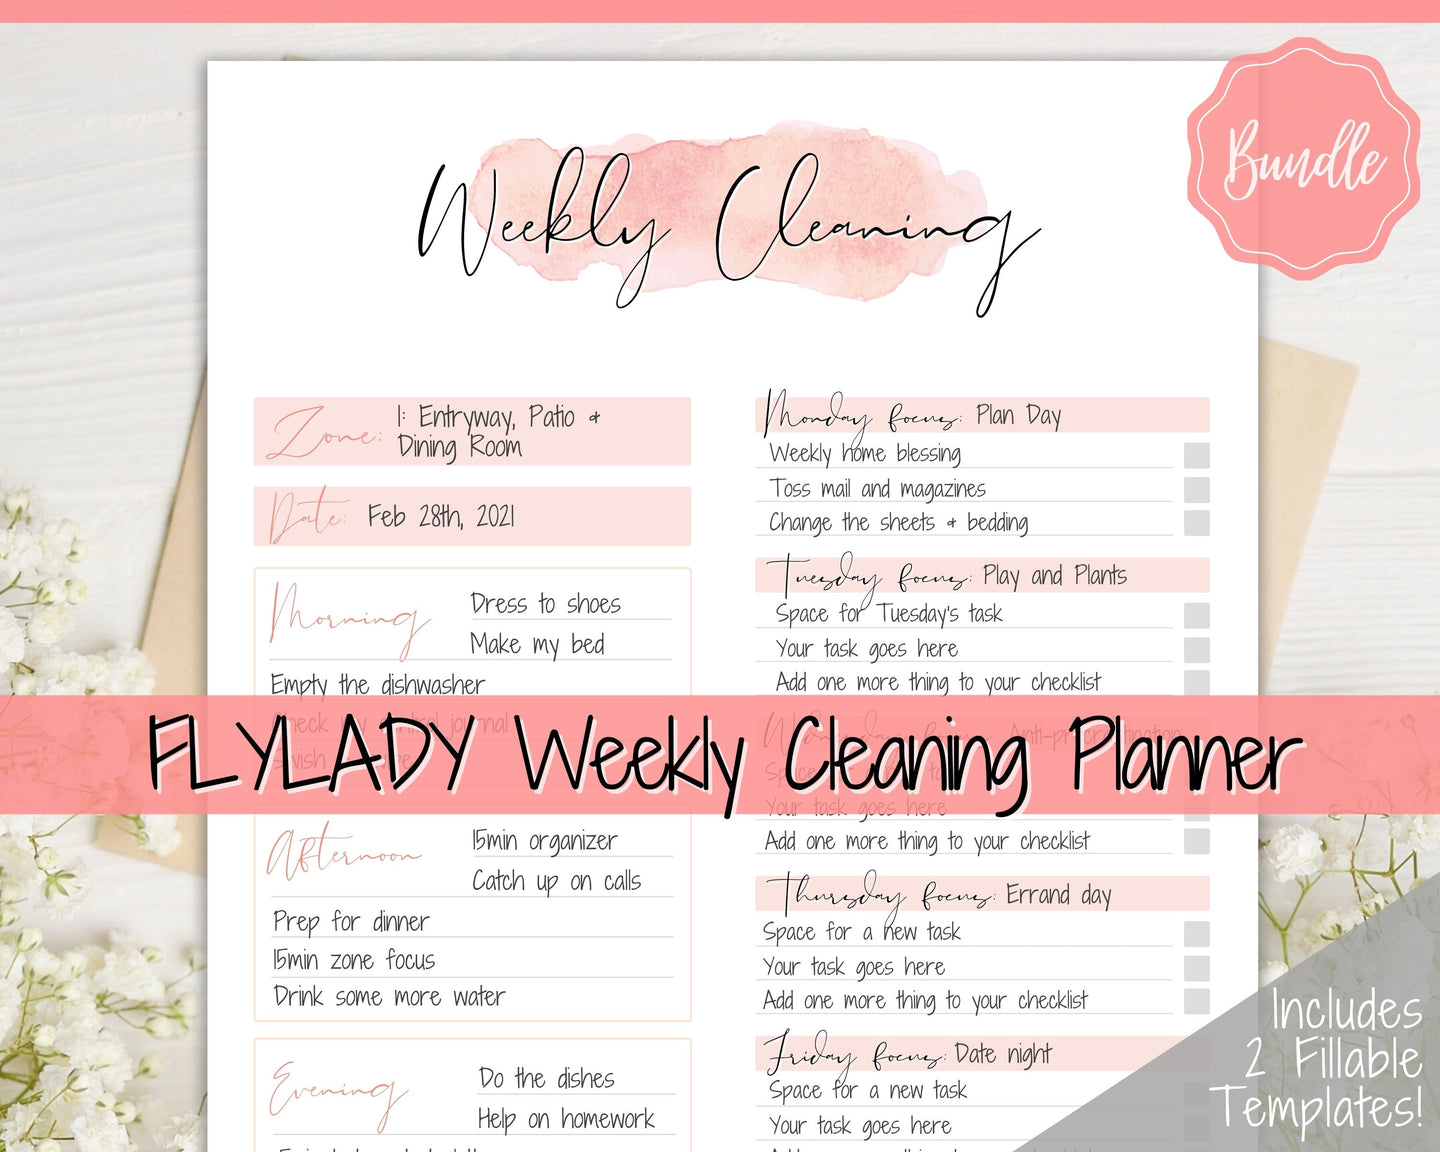 FLY LADY Control Journal, FlyLady Cleaning Planner! Daily Routine, Control Zones, Cleaning Checklist, Cleaning Schedule, Weekly House Chores | Portrait & Landscape - Pink